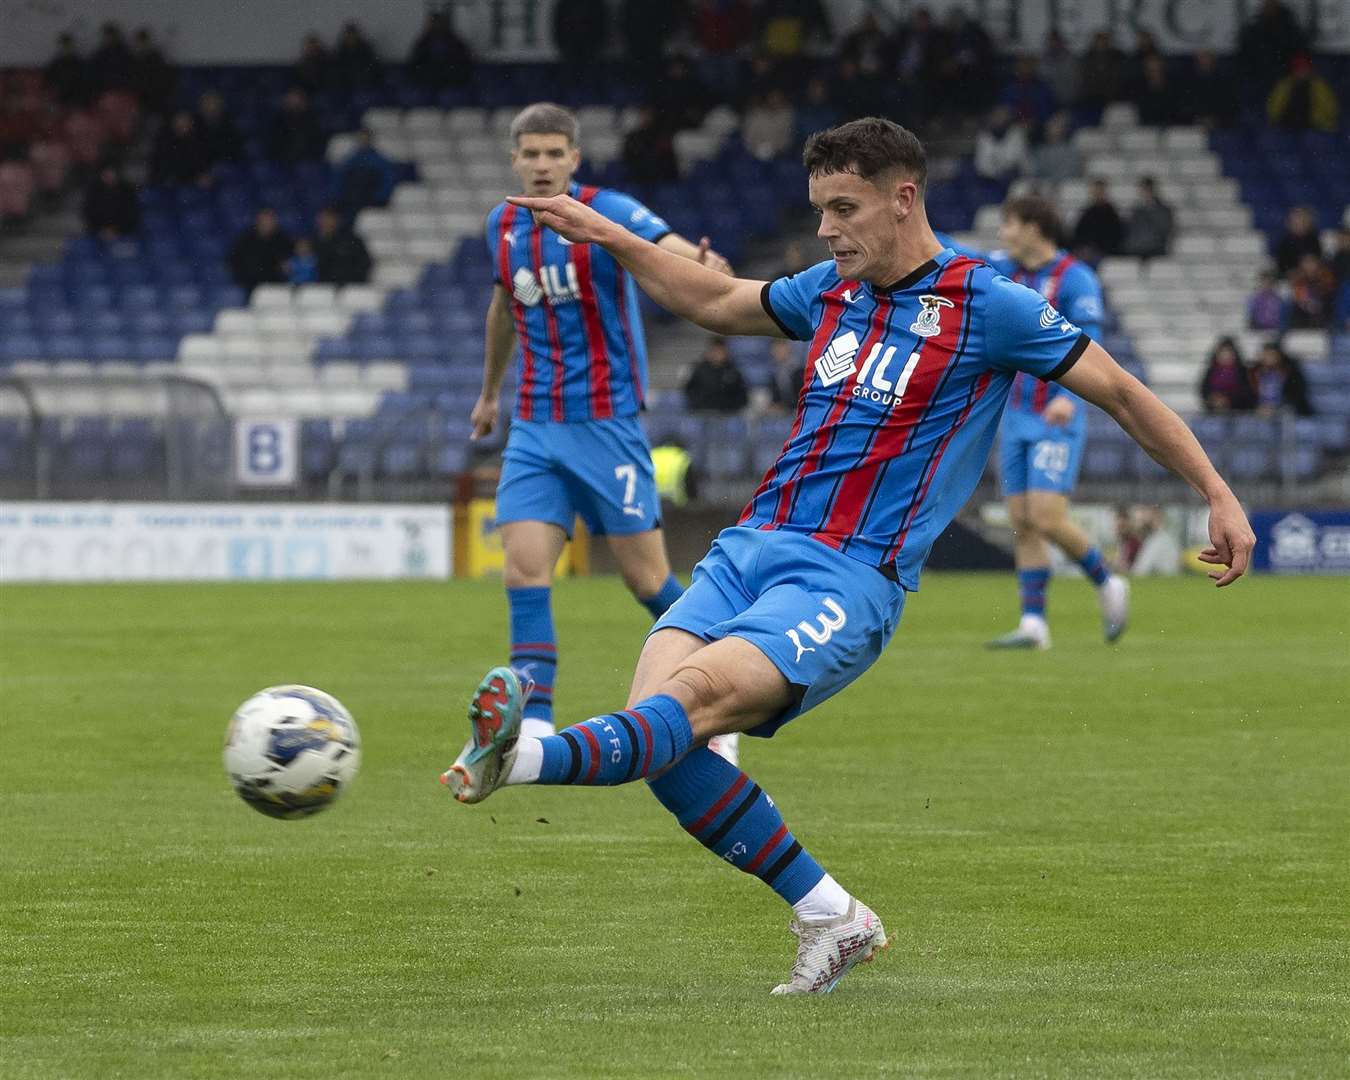 Cameron Harper in action for Inverness Caledonian Thistle.